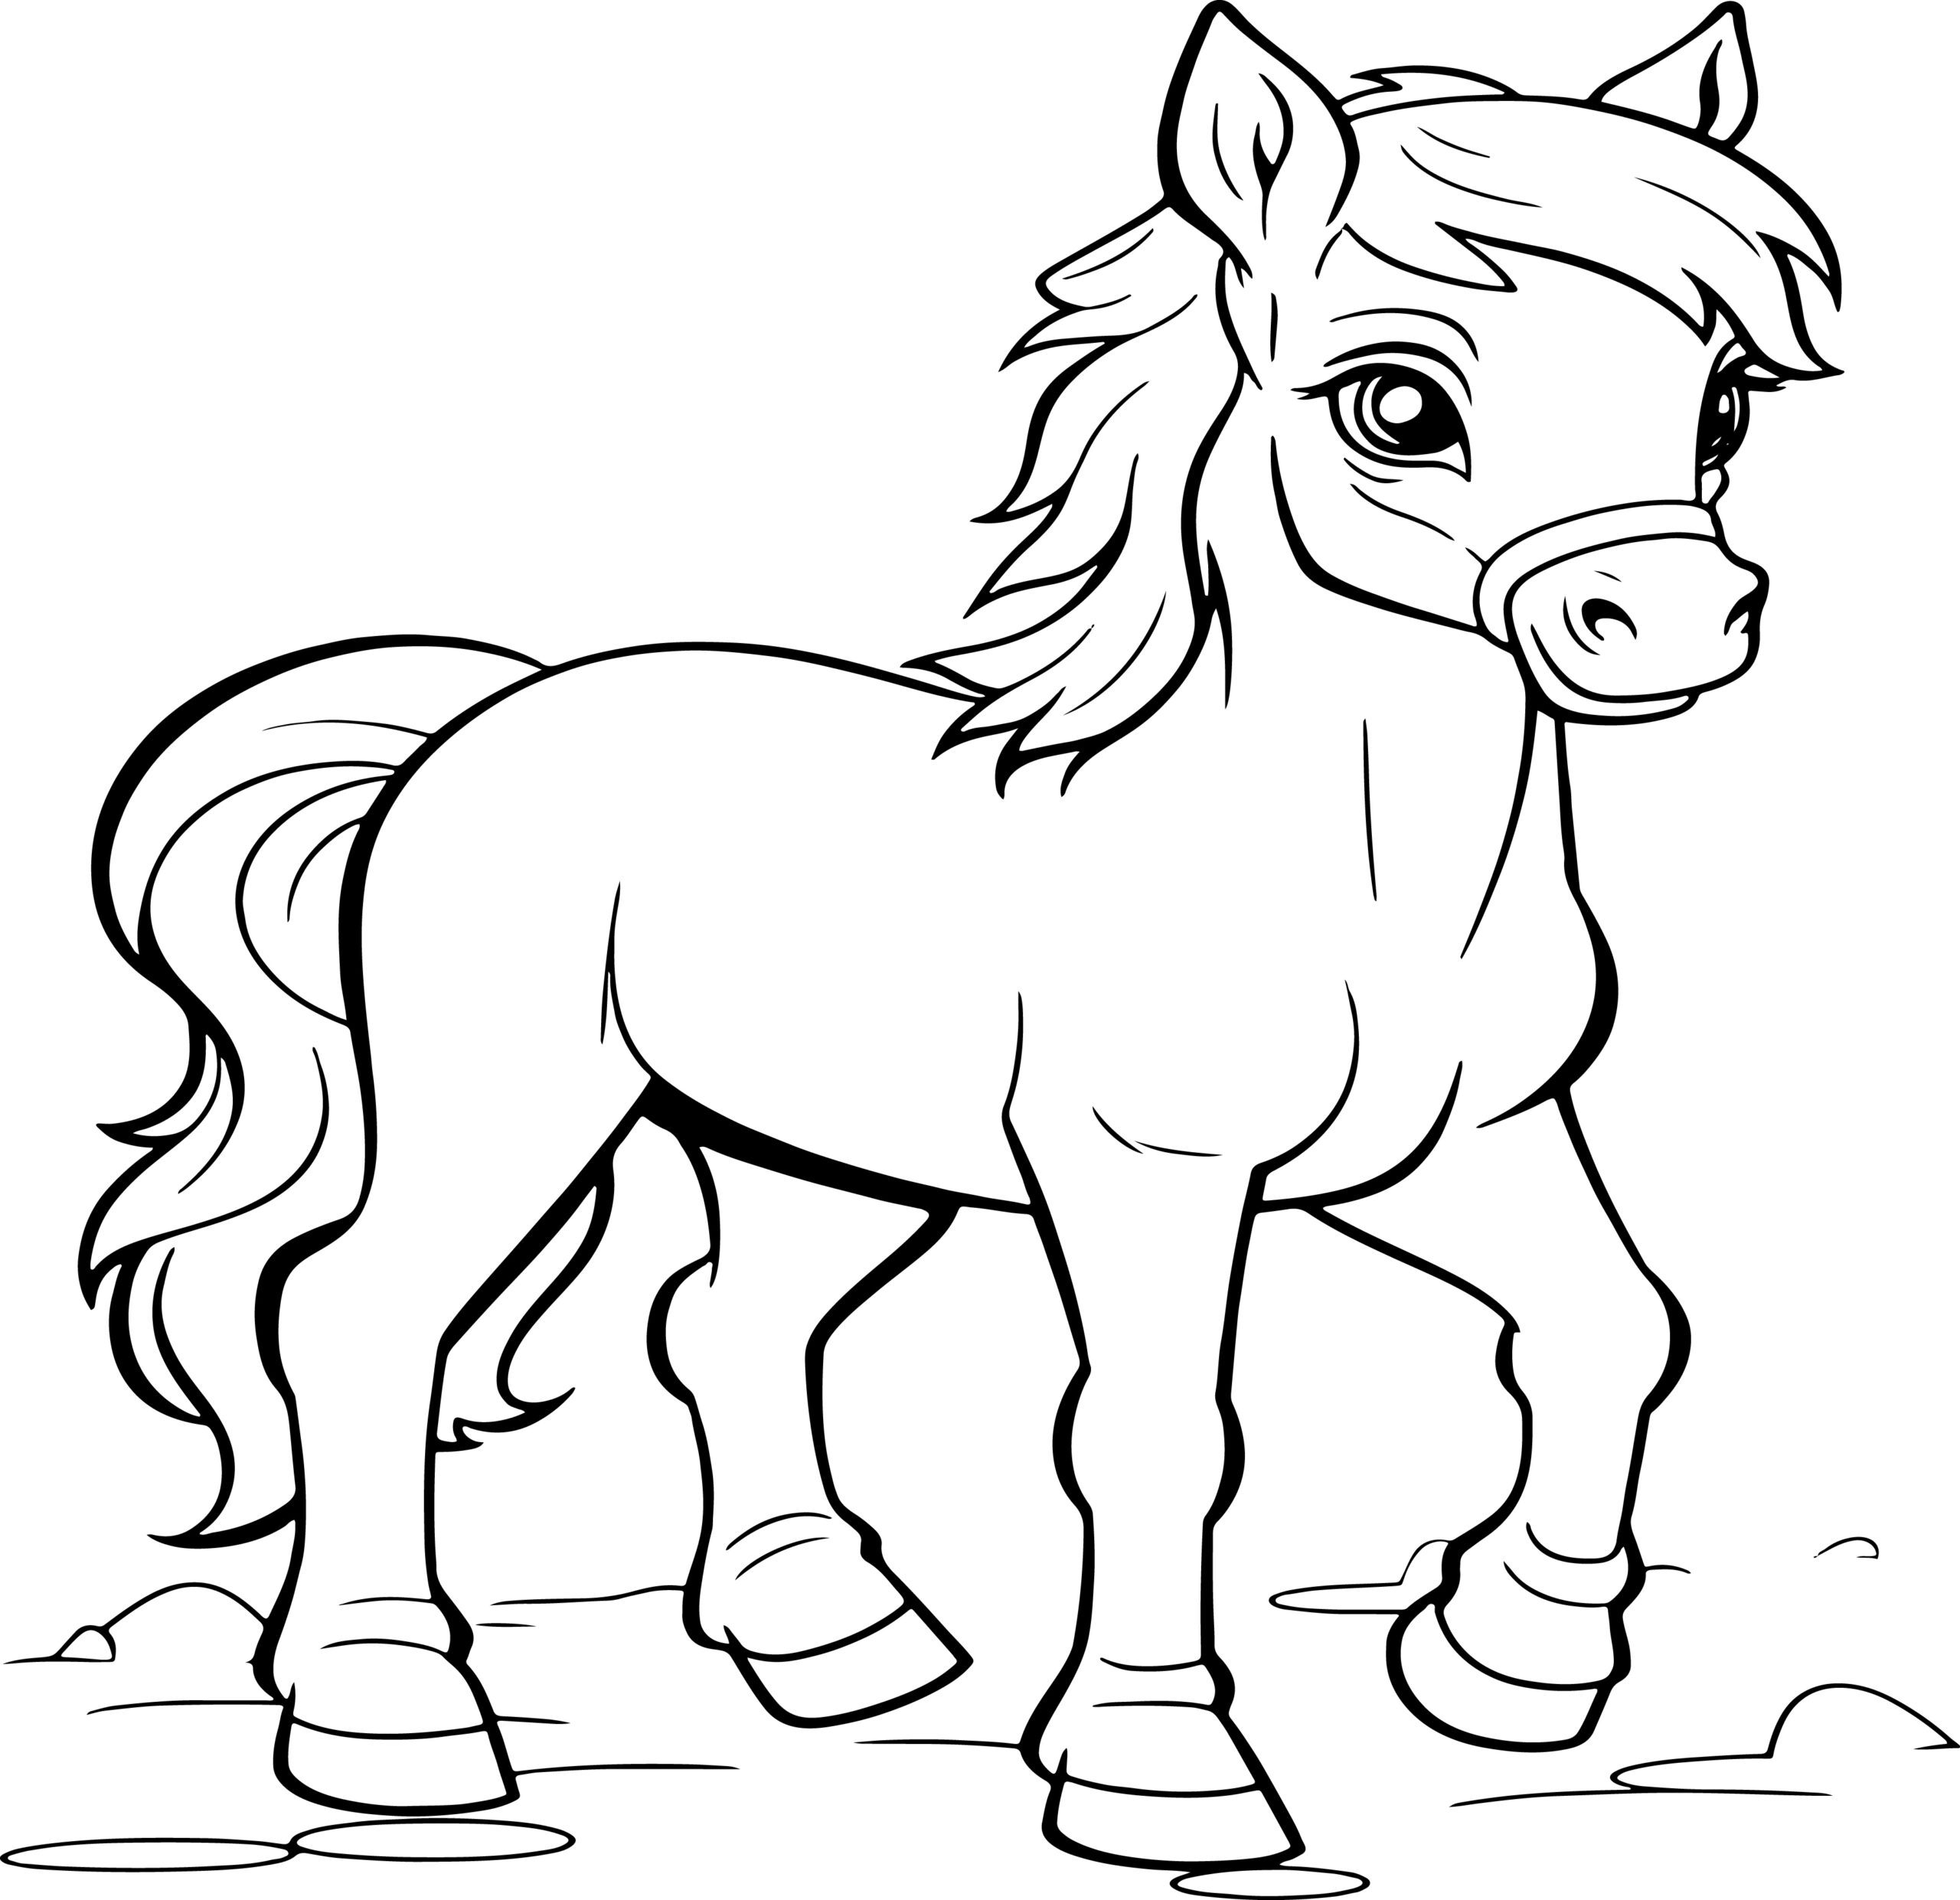 Horse coloring book a fun horses and ponies beautiful colouring pages made by teachers